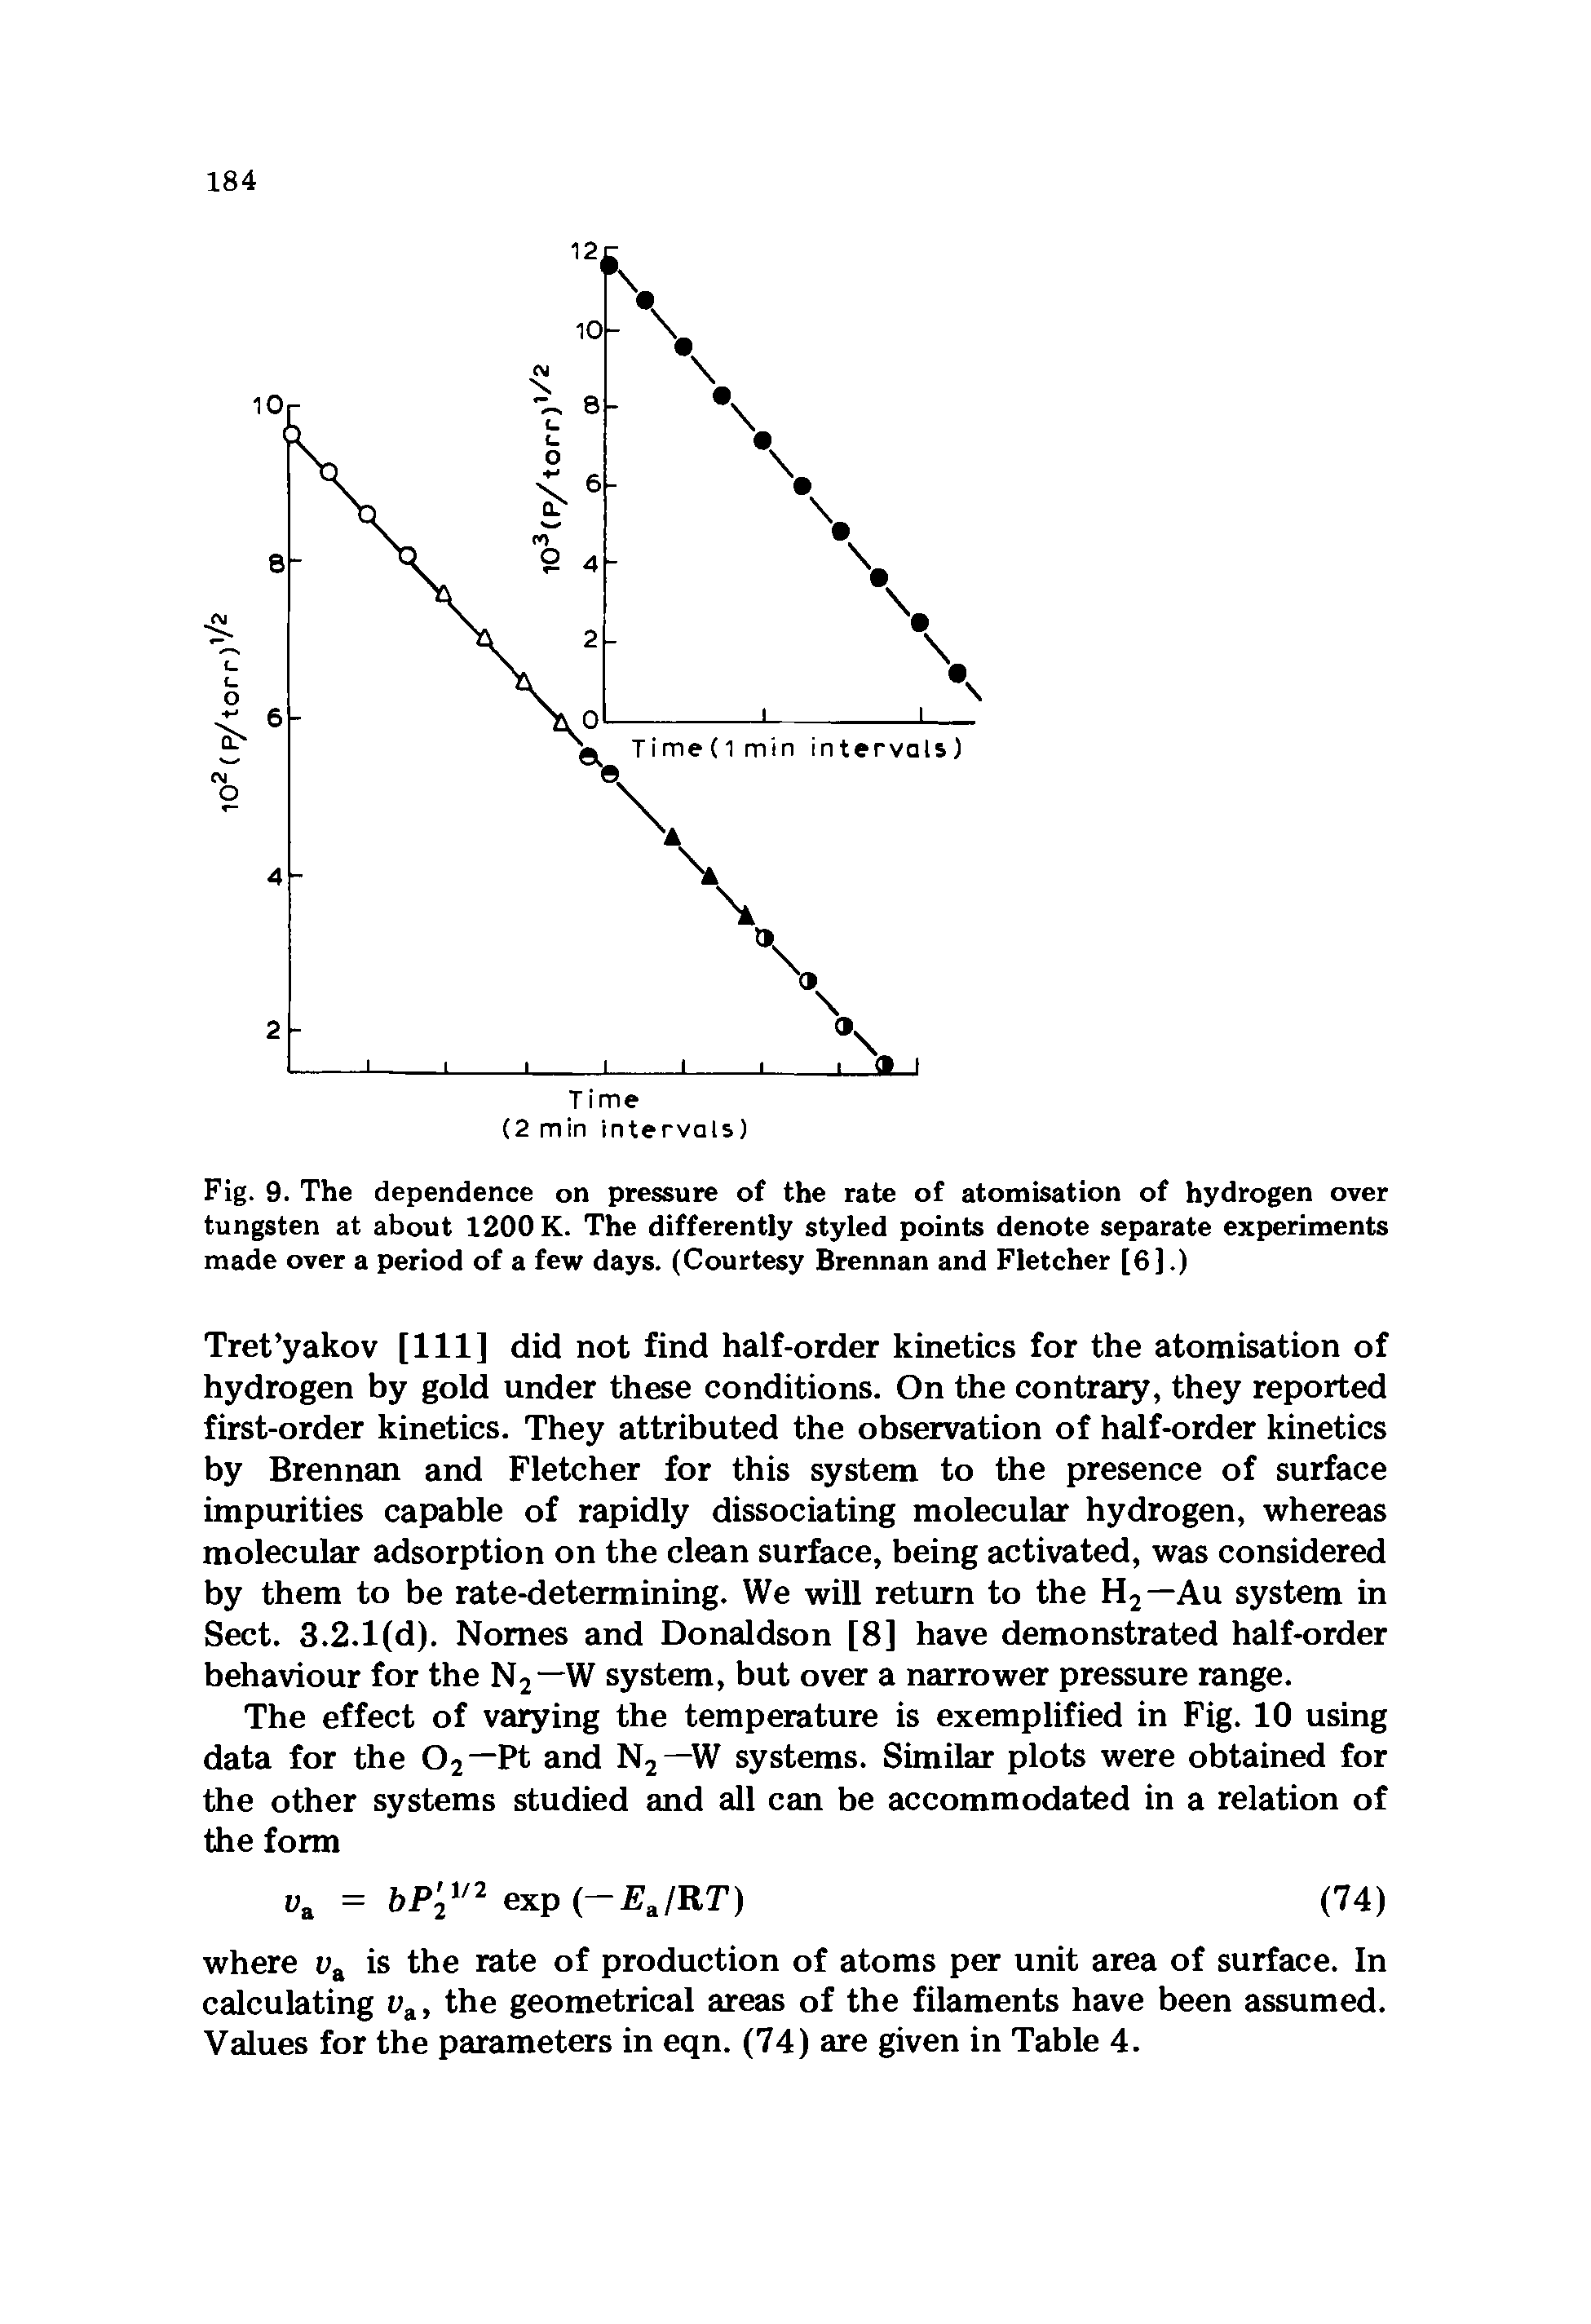 Fig. 9. The dependence on pressure of the rate of atomisation of hydrogen over tungsten at about 1200 K. The differently styled points denote separate experiments made over a period of a few days. (Courtesy Brennan and Fletcher [6].)...